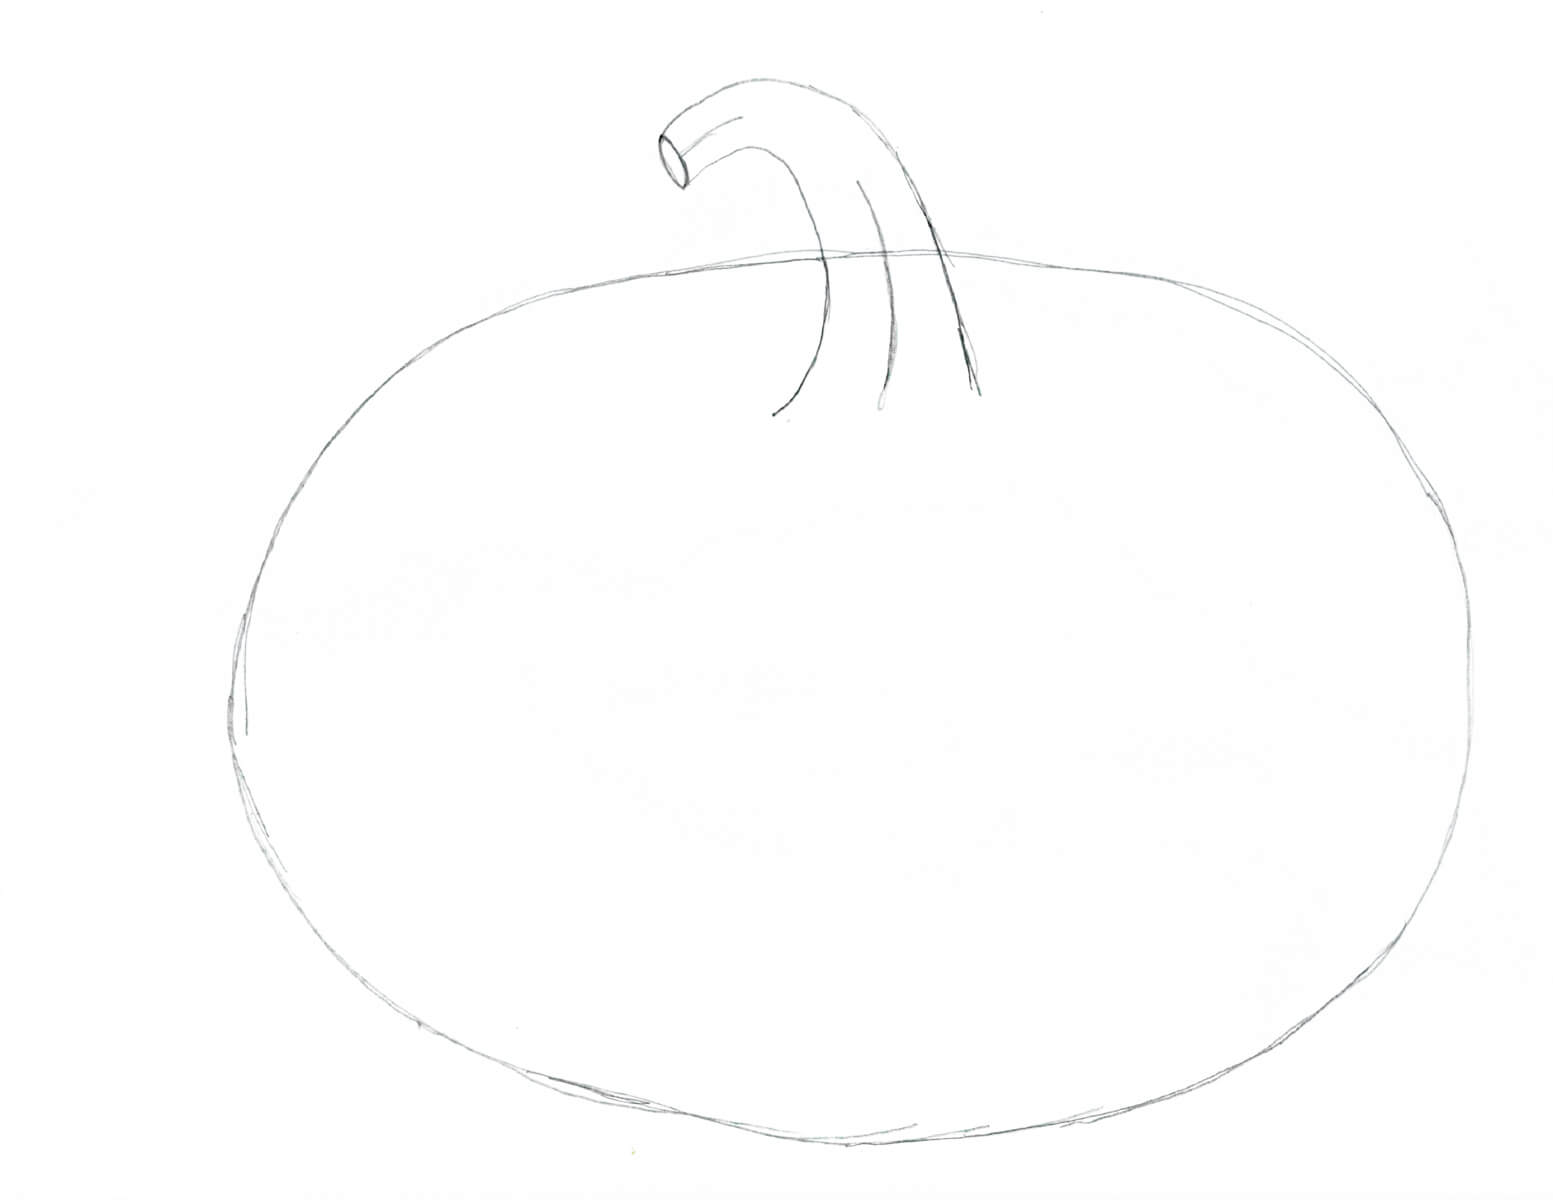 A stem is added to an oval to make an easy pumpkin drawing in pencil.